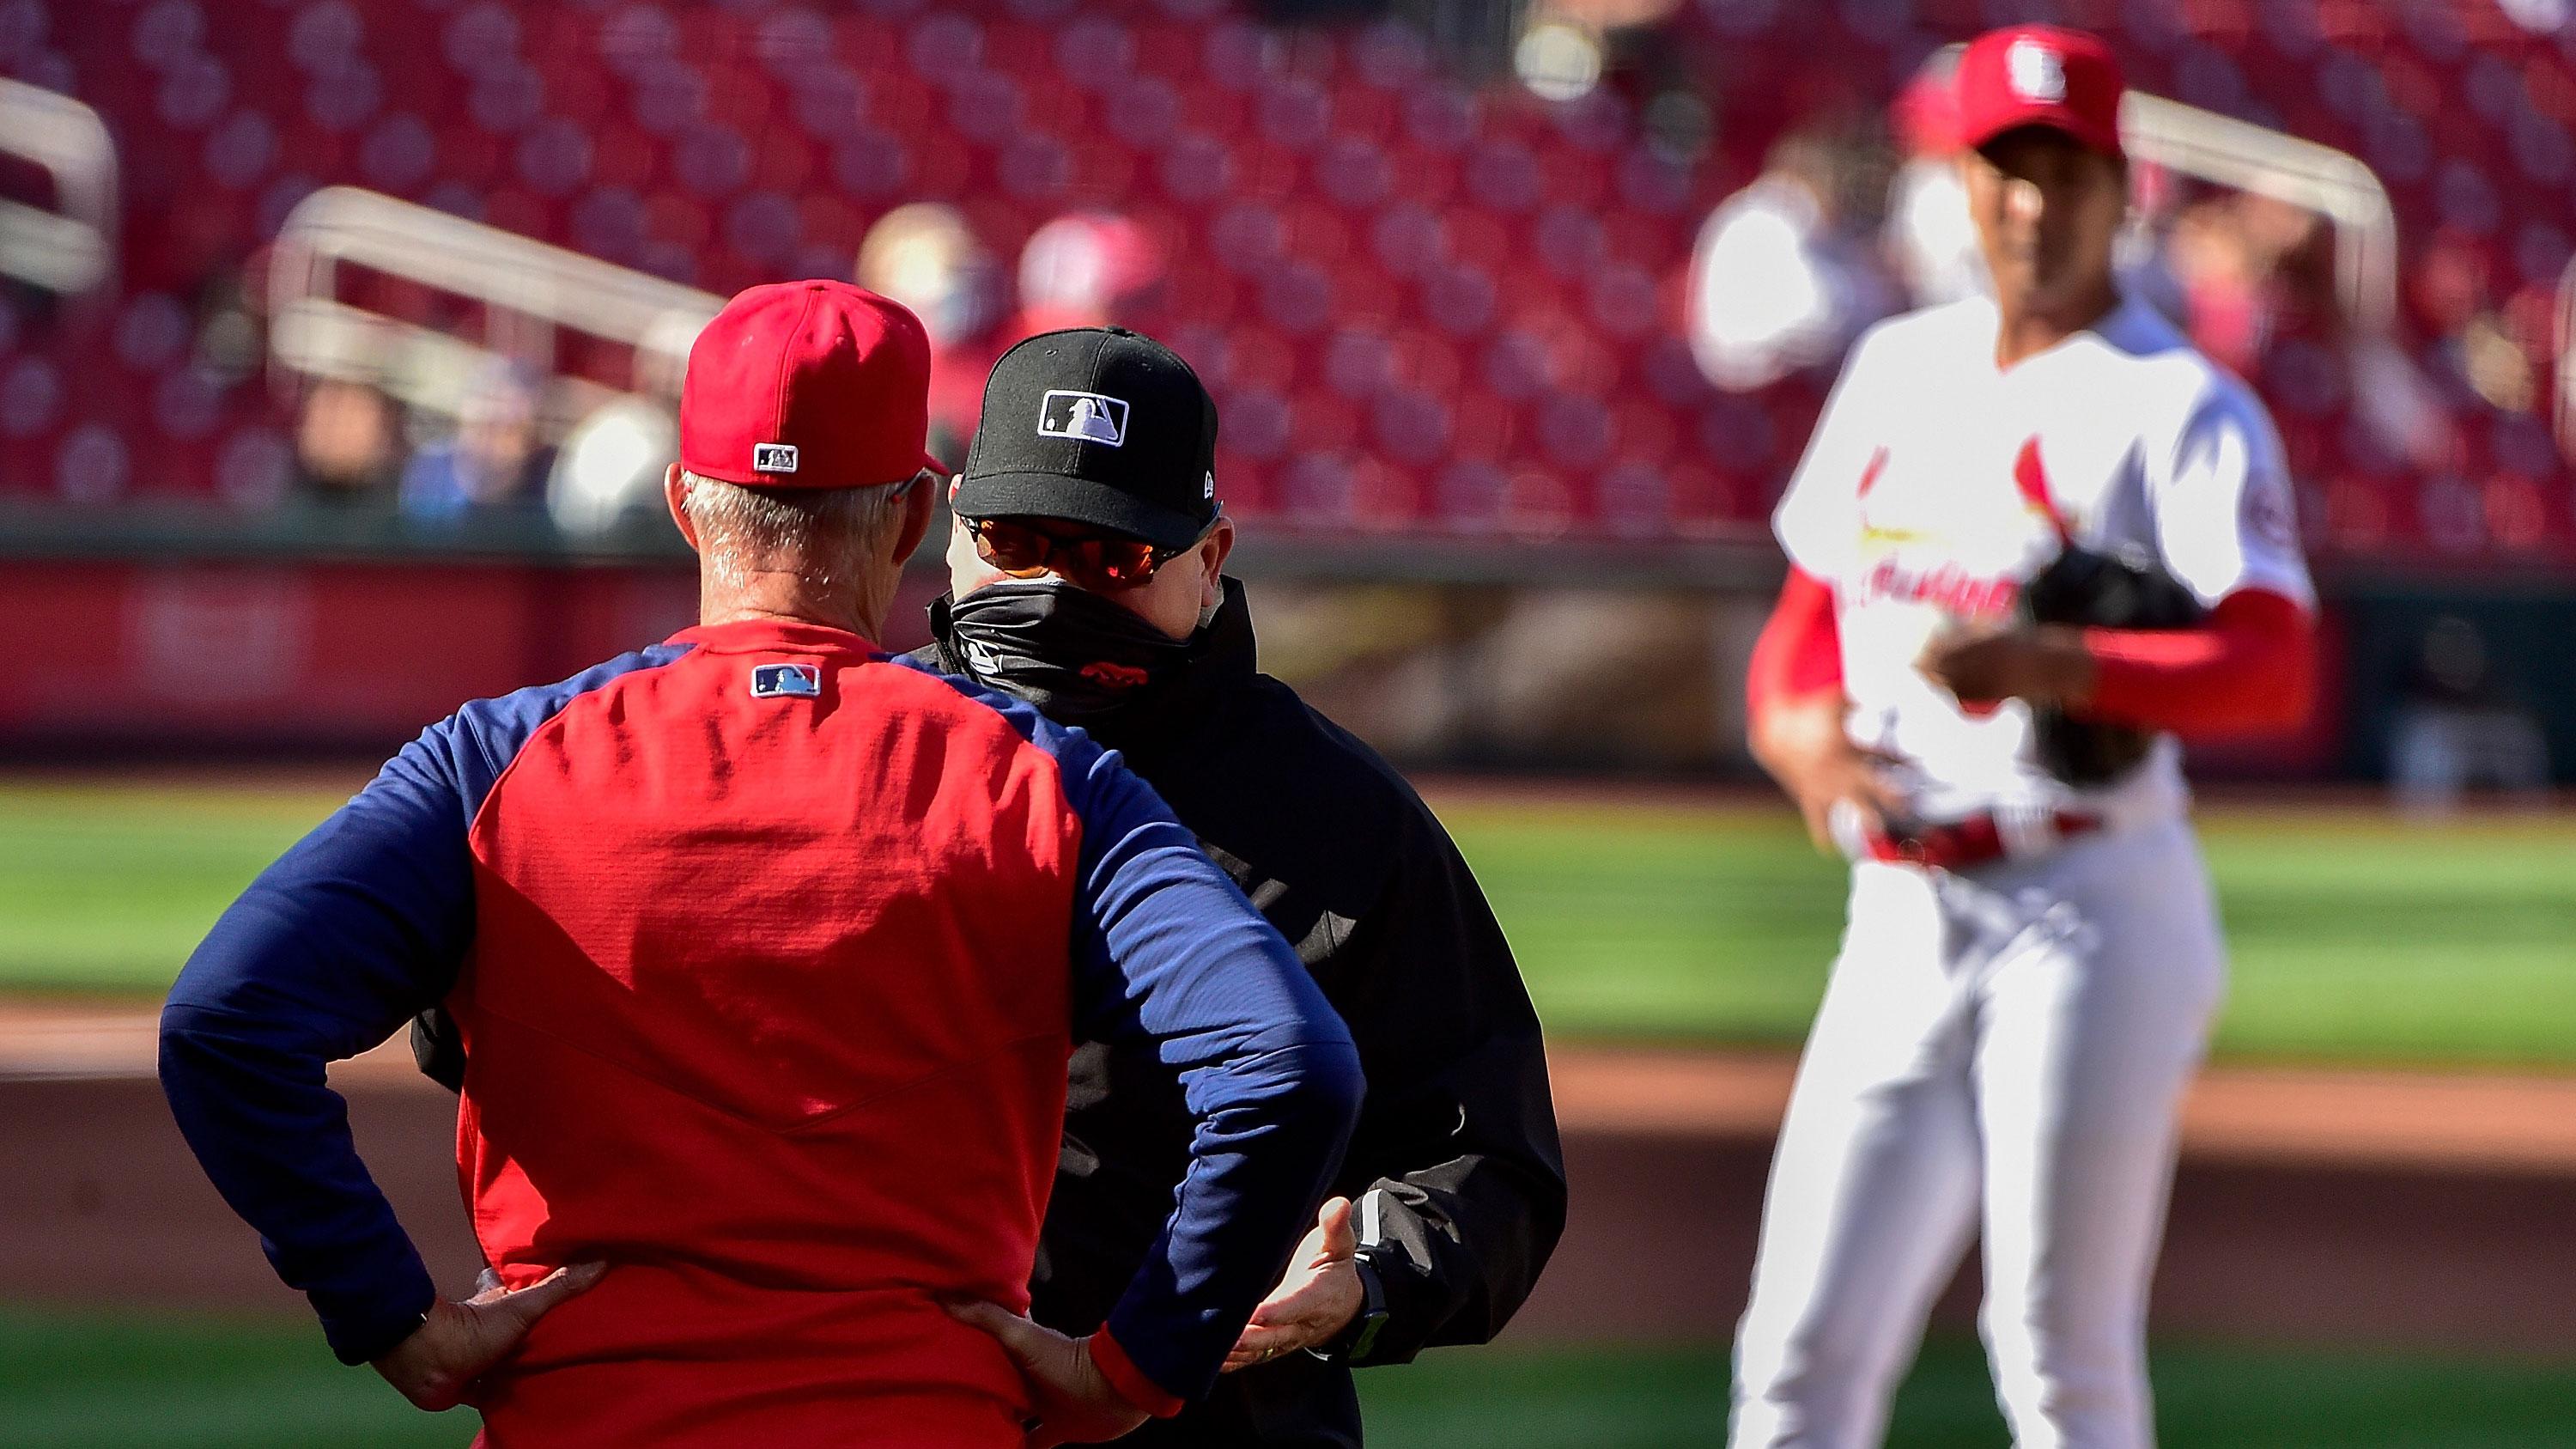 May 5, 2021; St. Louis, Missouri, USA; St. Louis Cardinals pitching coach Mike Maddux (31) is stopped by umpire Mark Carlson (6) as he walks out to the mound to talk with starting pitcher Kwang Hyun Kim (33) during the fourth inning against the New York Mets in game one of a doubleheader at Busch Stadium. / Jeff Curry-USA TODAY Sports